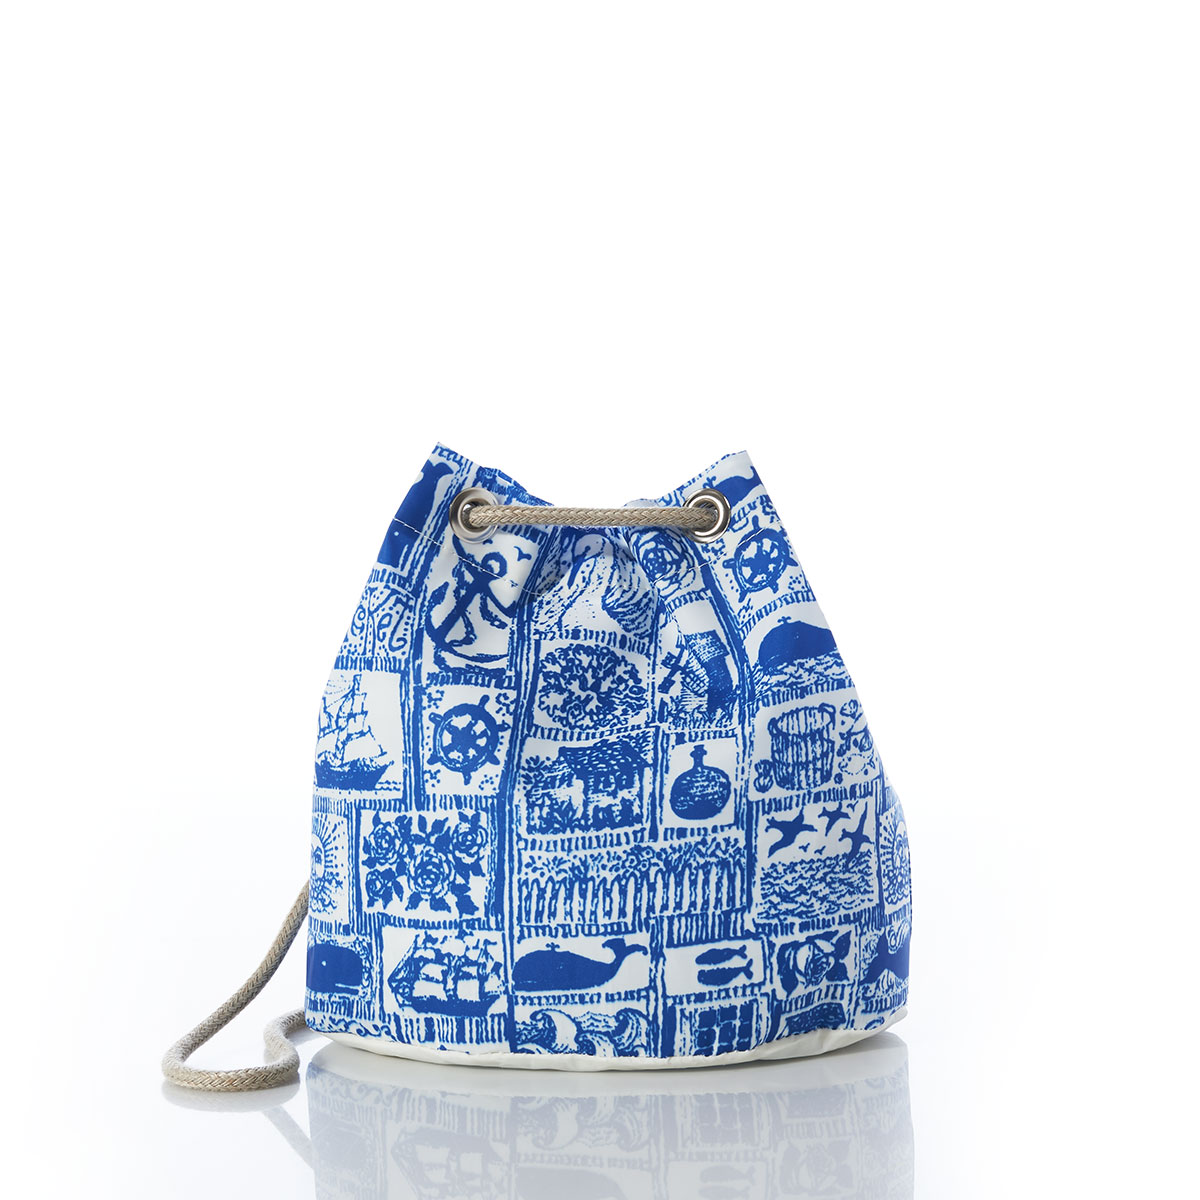 blue squares filled with various nautical imagery printed on recycled sail cloth convertible bucket bag with hemp dock line straps